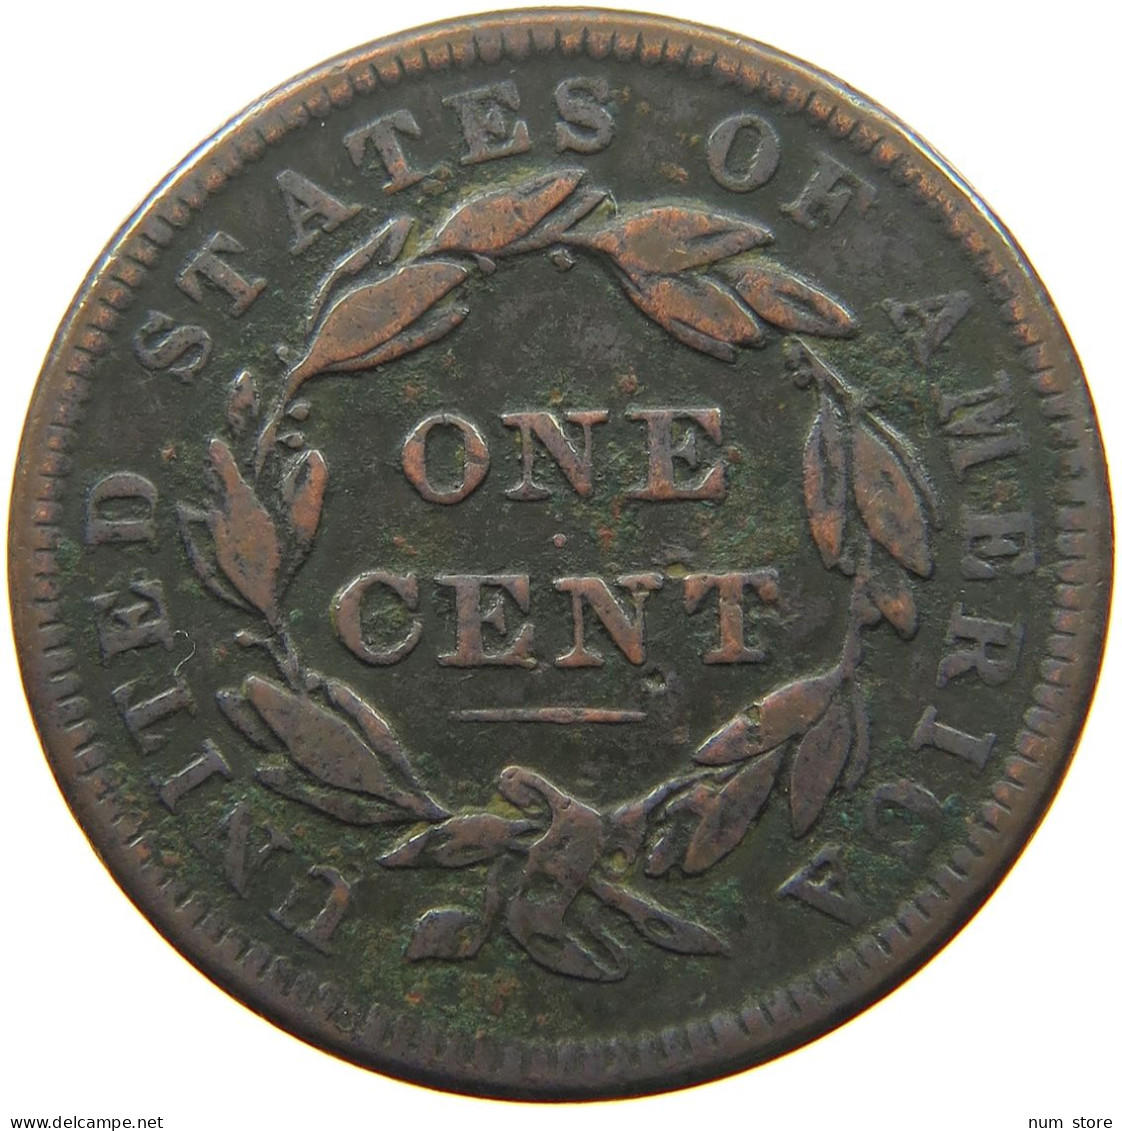 UNITED STATES OF AMERICA LARGE CENT 1838 CORONET HEAD #t141 0301 - 1816-1839: Coronet Head (Tête Couronnée)